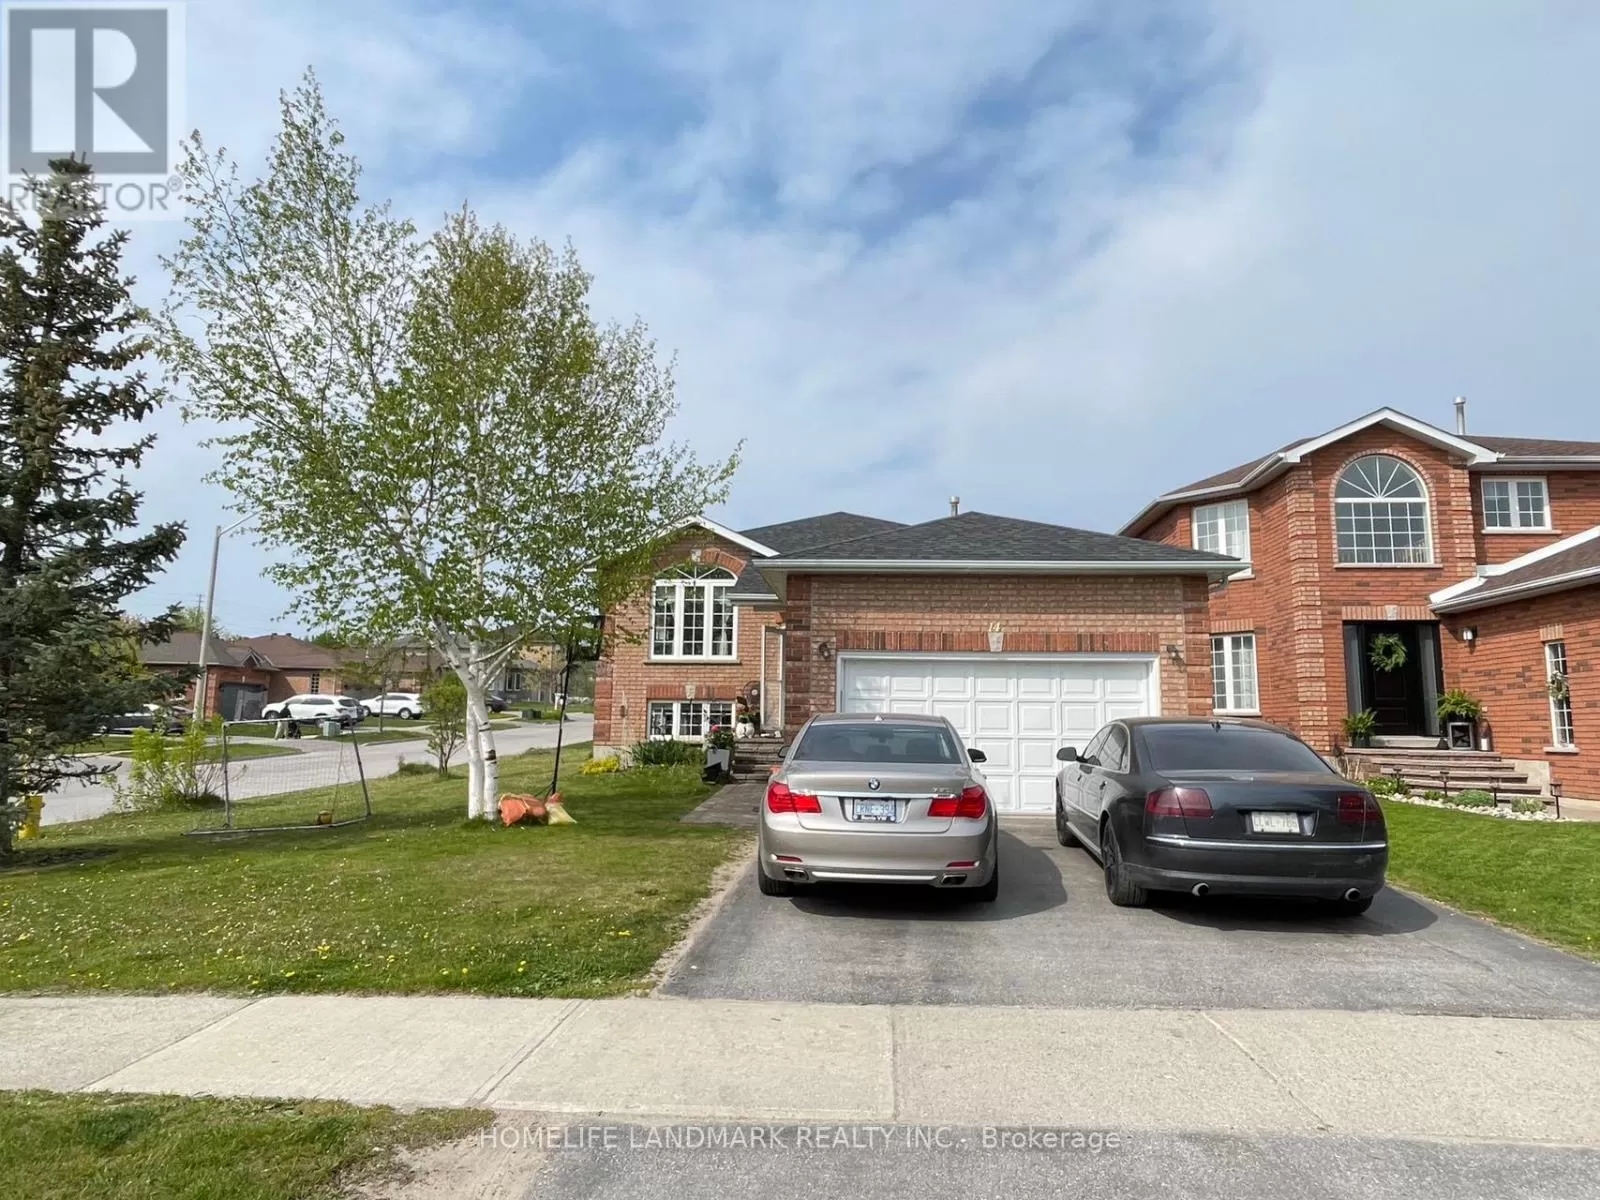 House for rent: 14 Crompton Drive, Barrie, Ontario L4M 6M8